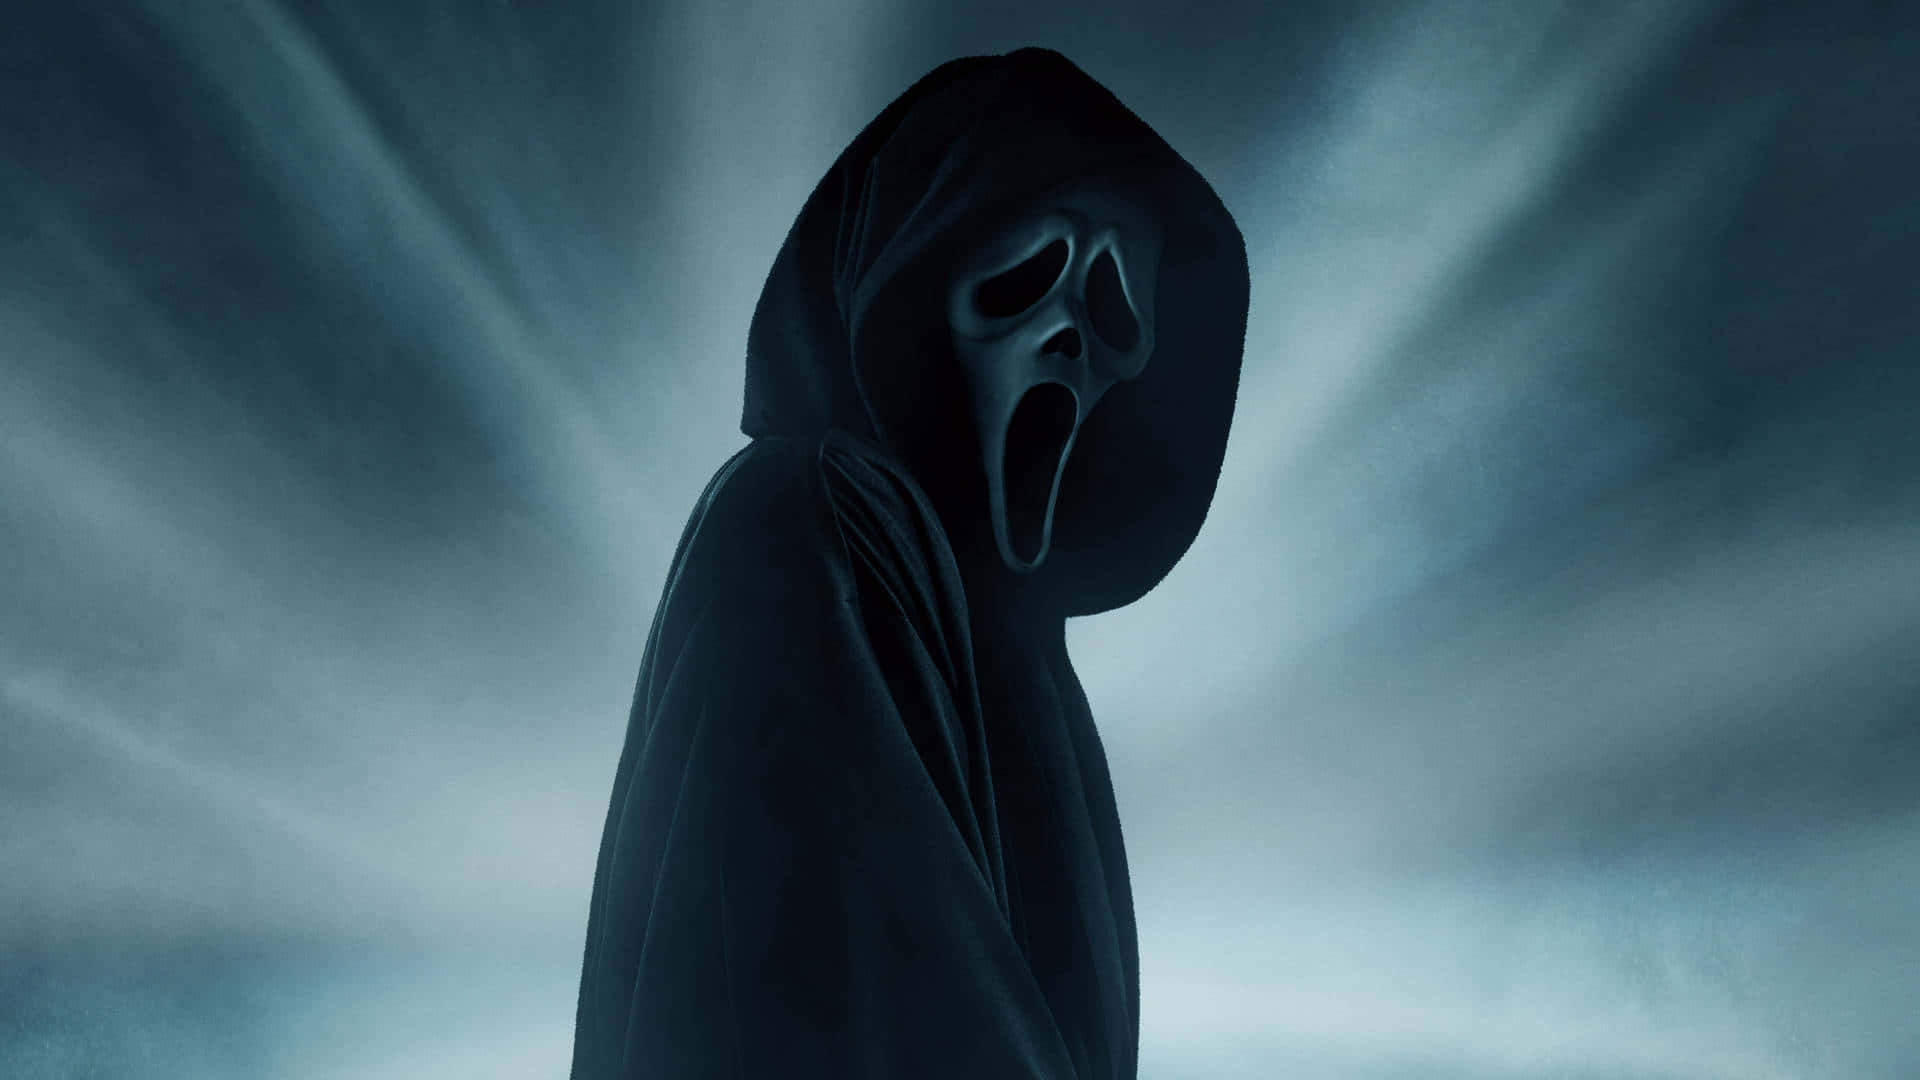 Scream Movie Poster With A Hooded Man In The Background